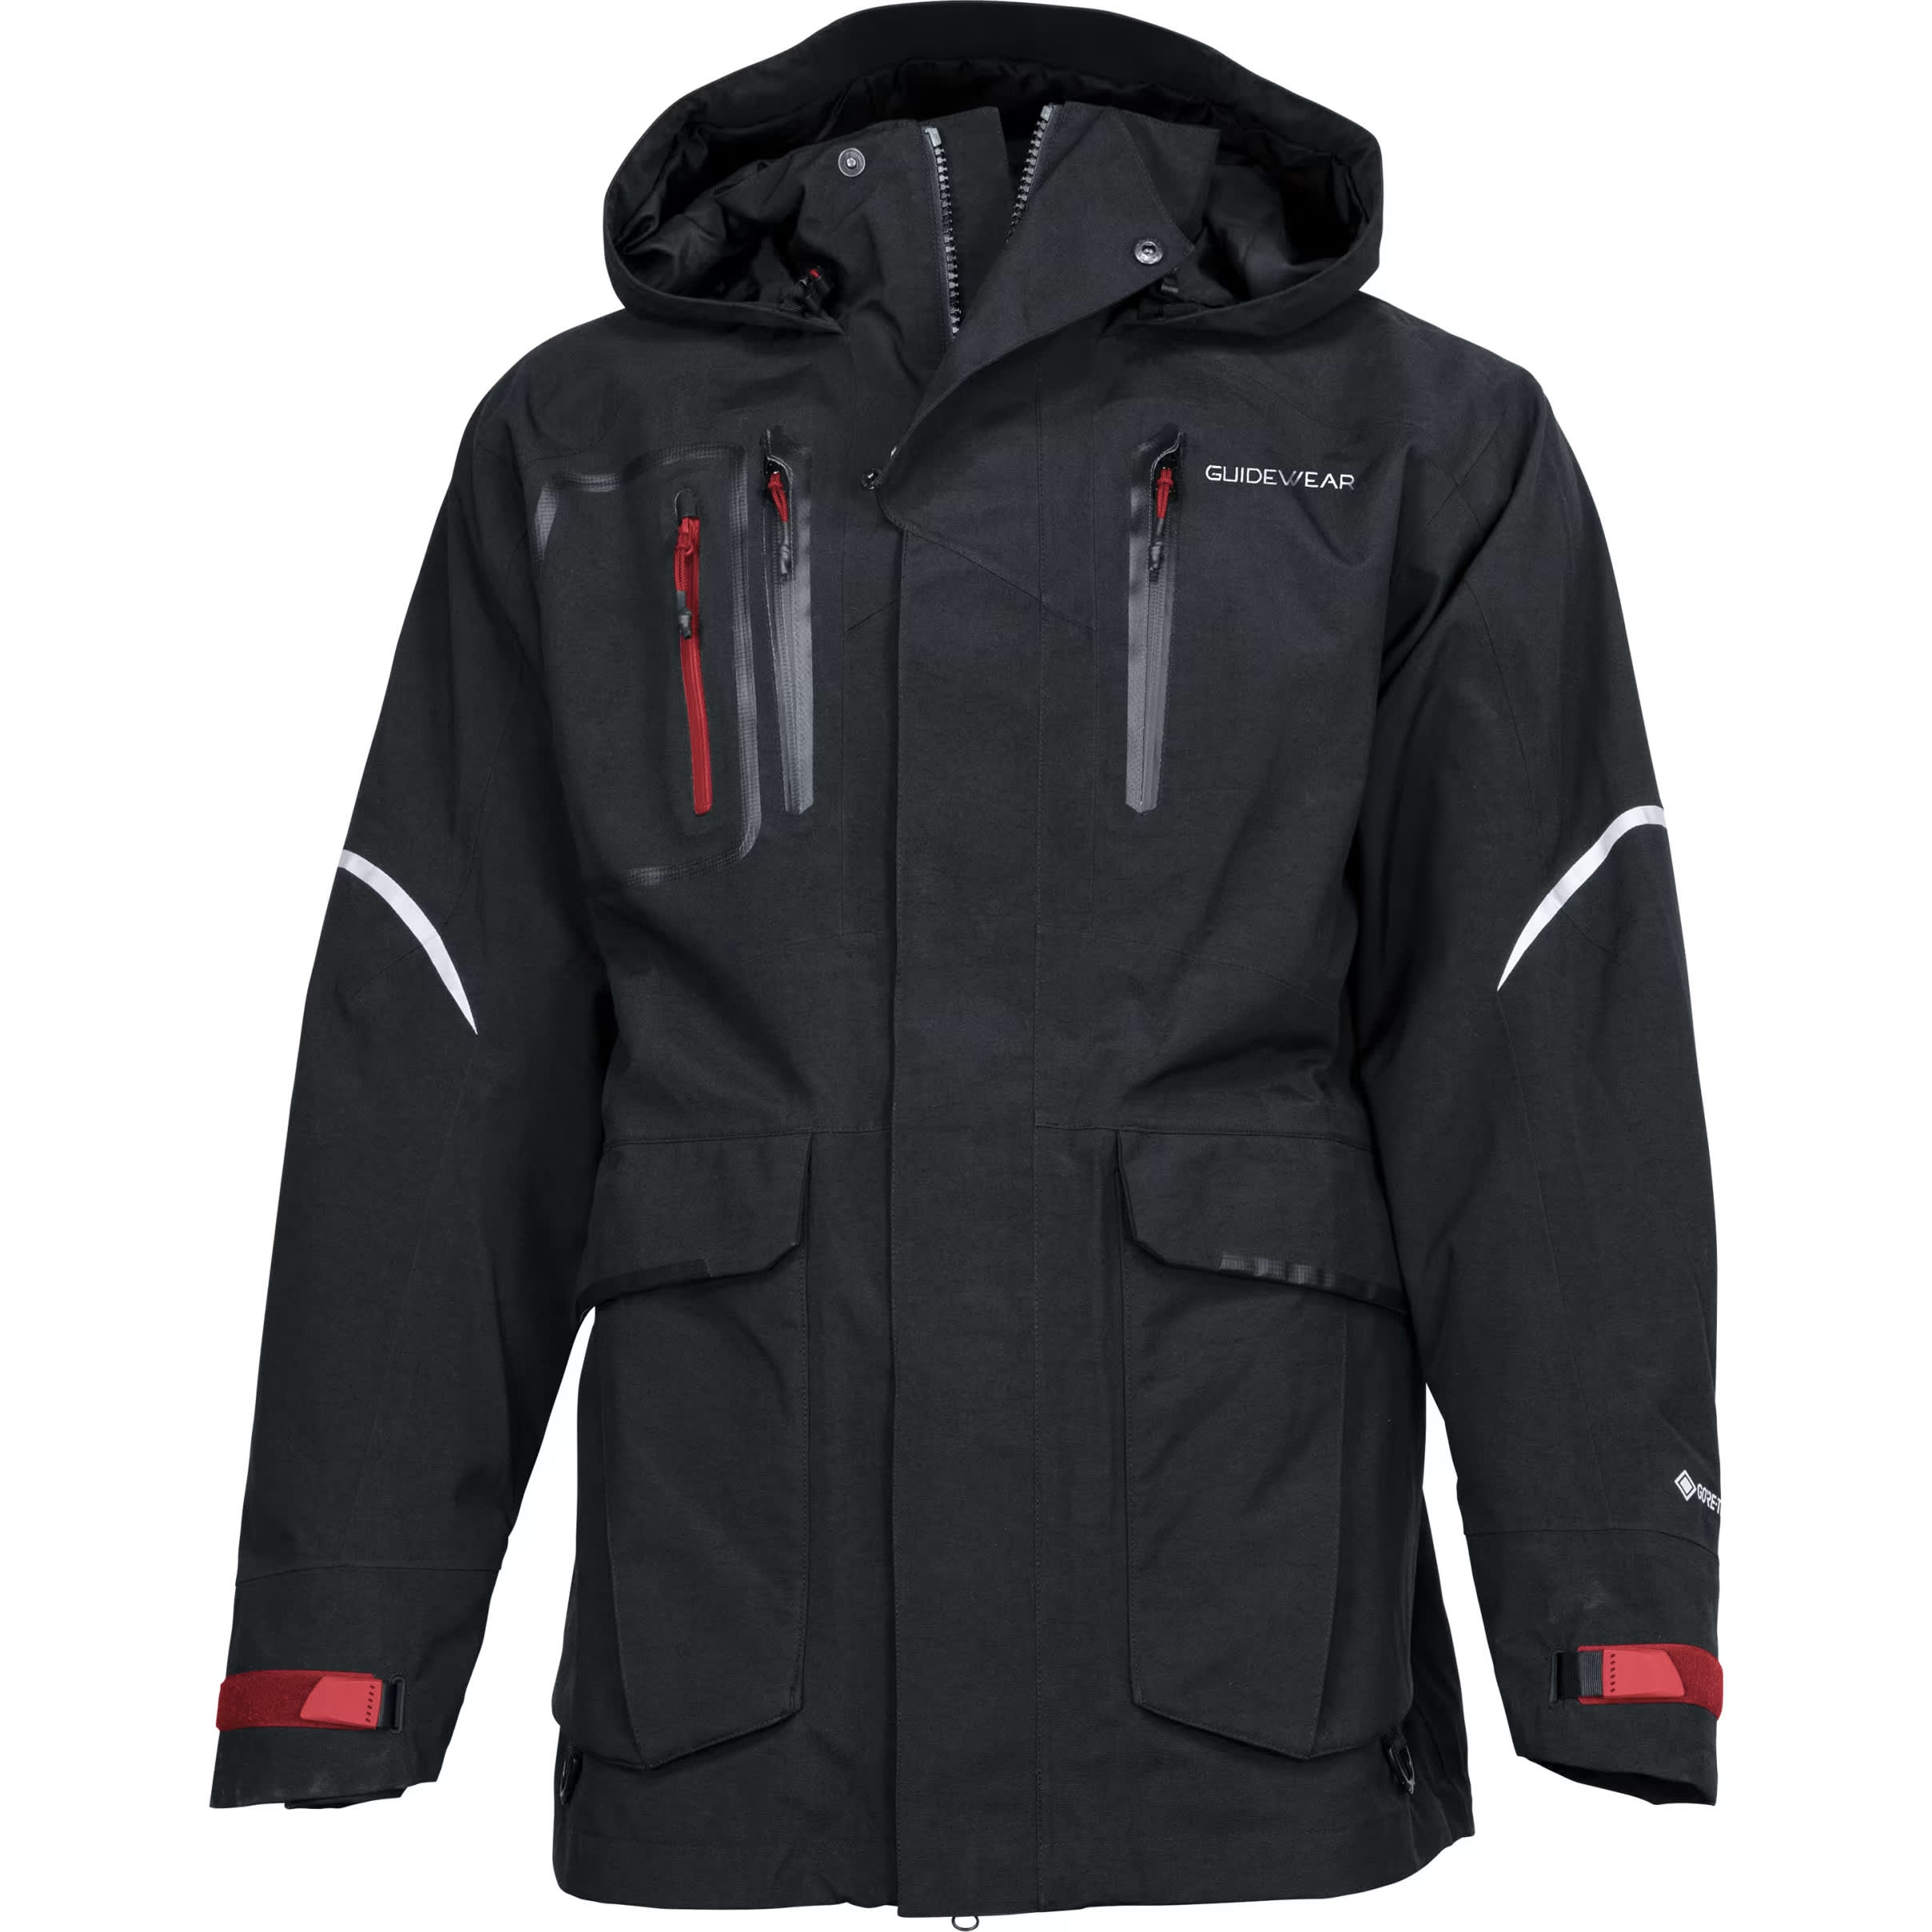 Guidewear Men's Xtreme Jacket with GORE-TEX | Cabela's Canada